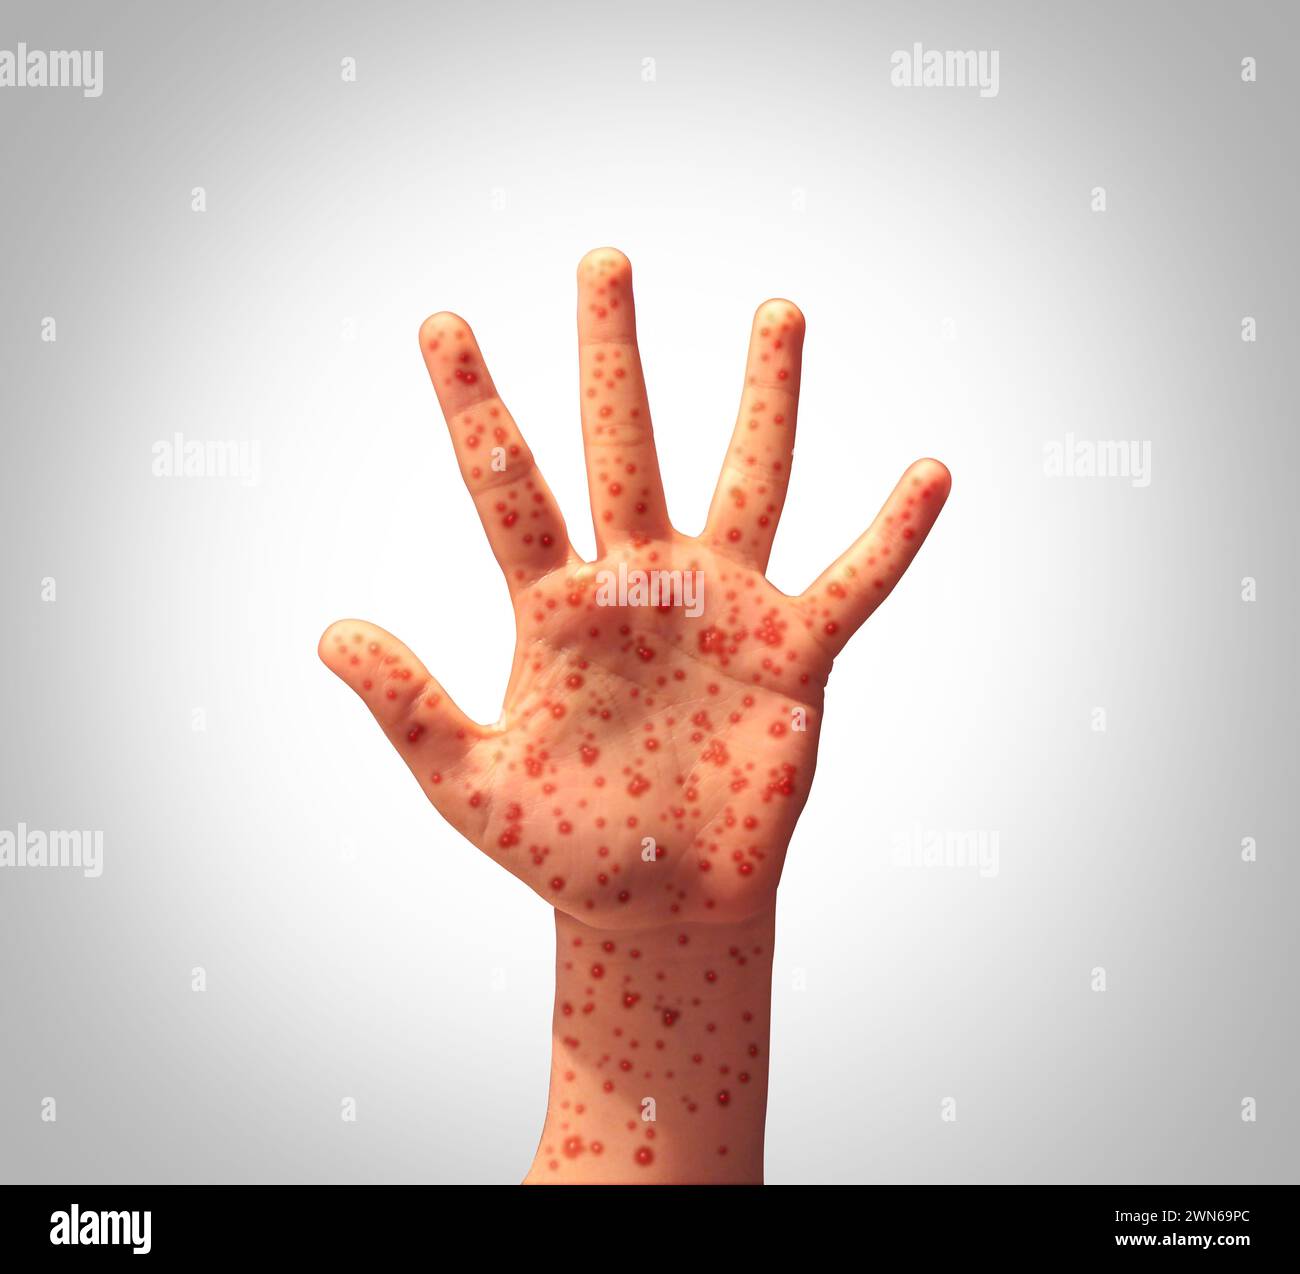 Measles Disease Concept as a Hand with a viral illness infection spread as Koplik spots on the skin and the dangers of spreading the contagious virus Stock Photo